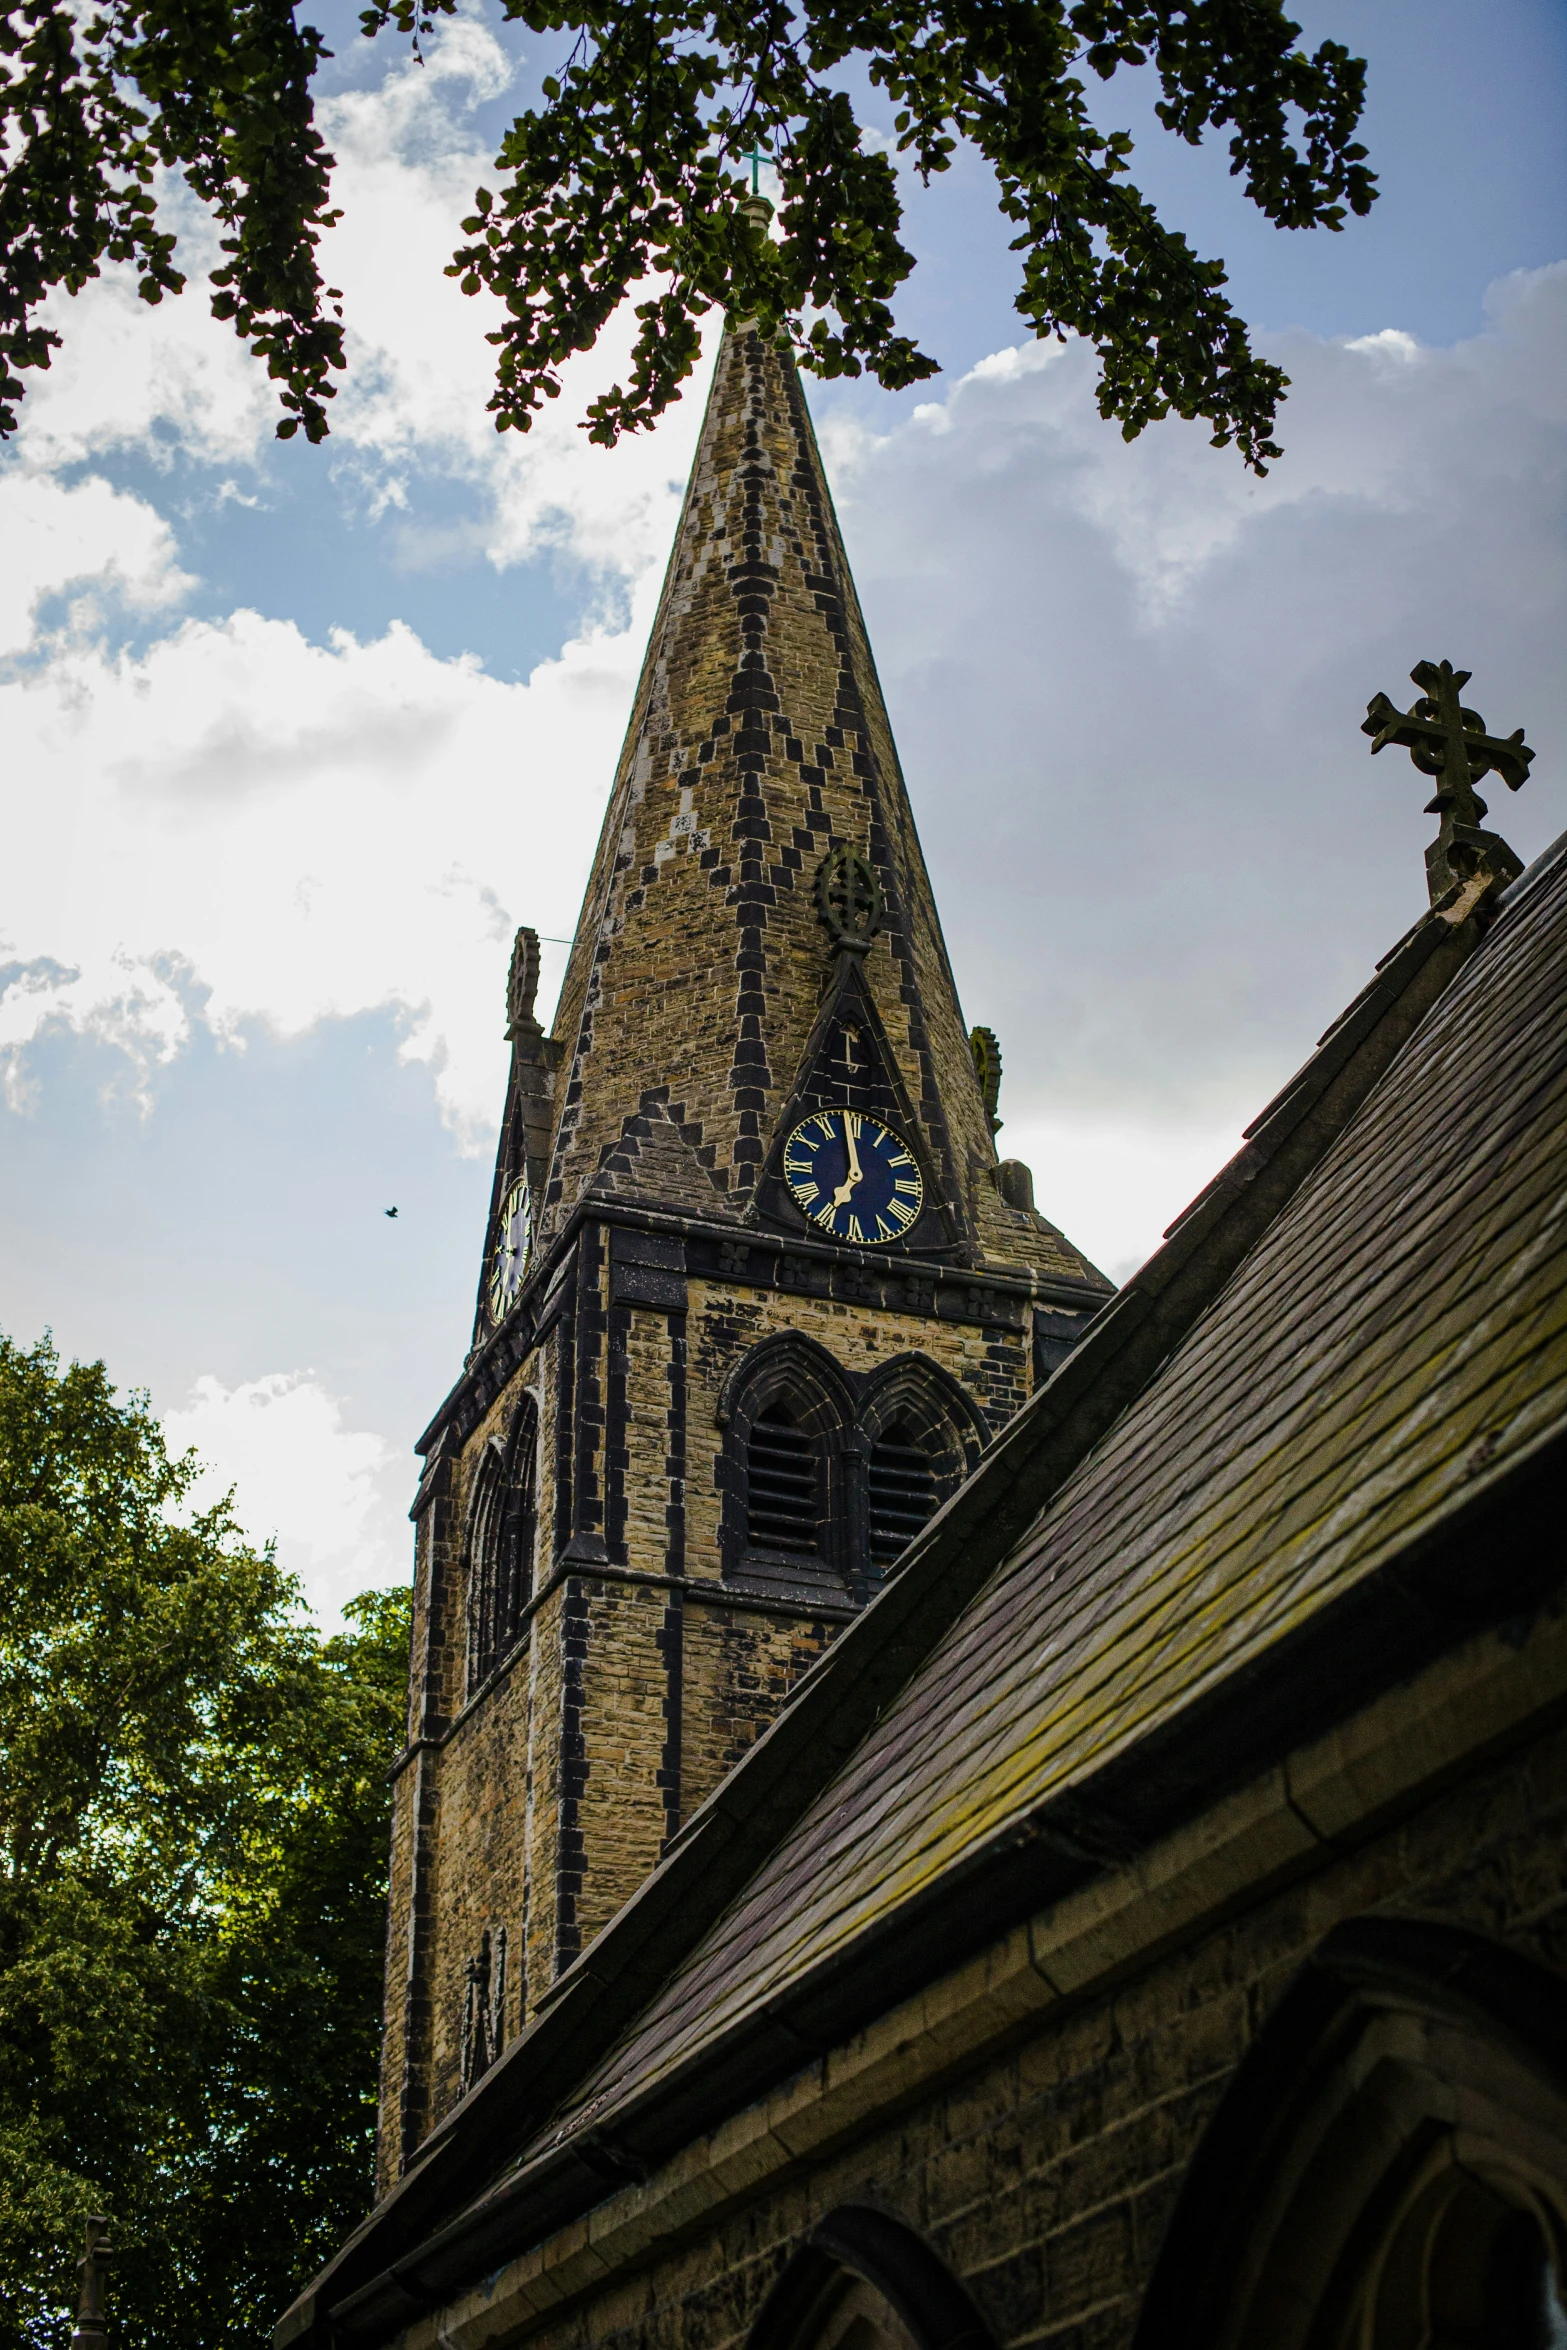 a view of a church tower from the outside